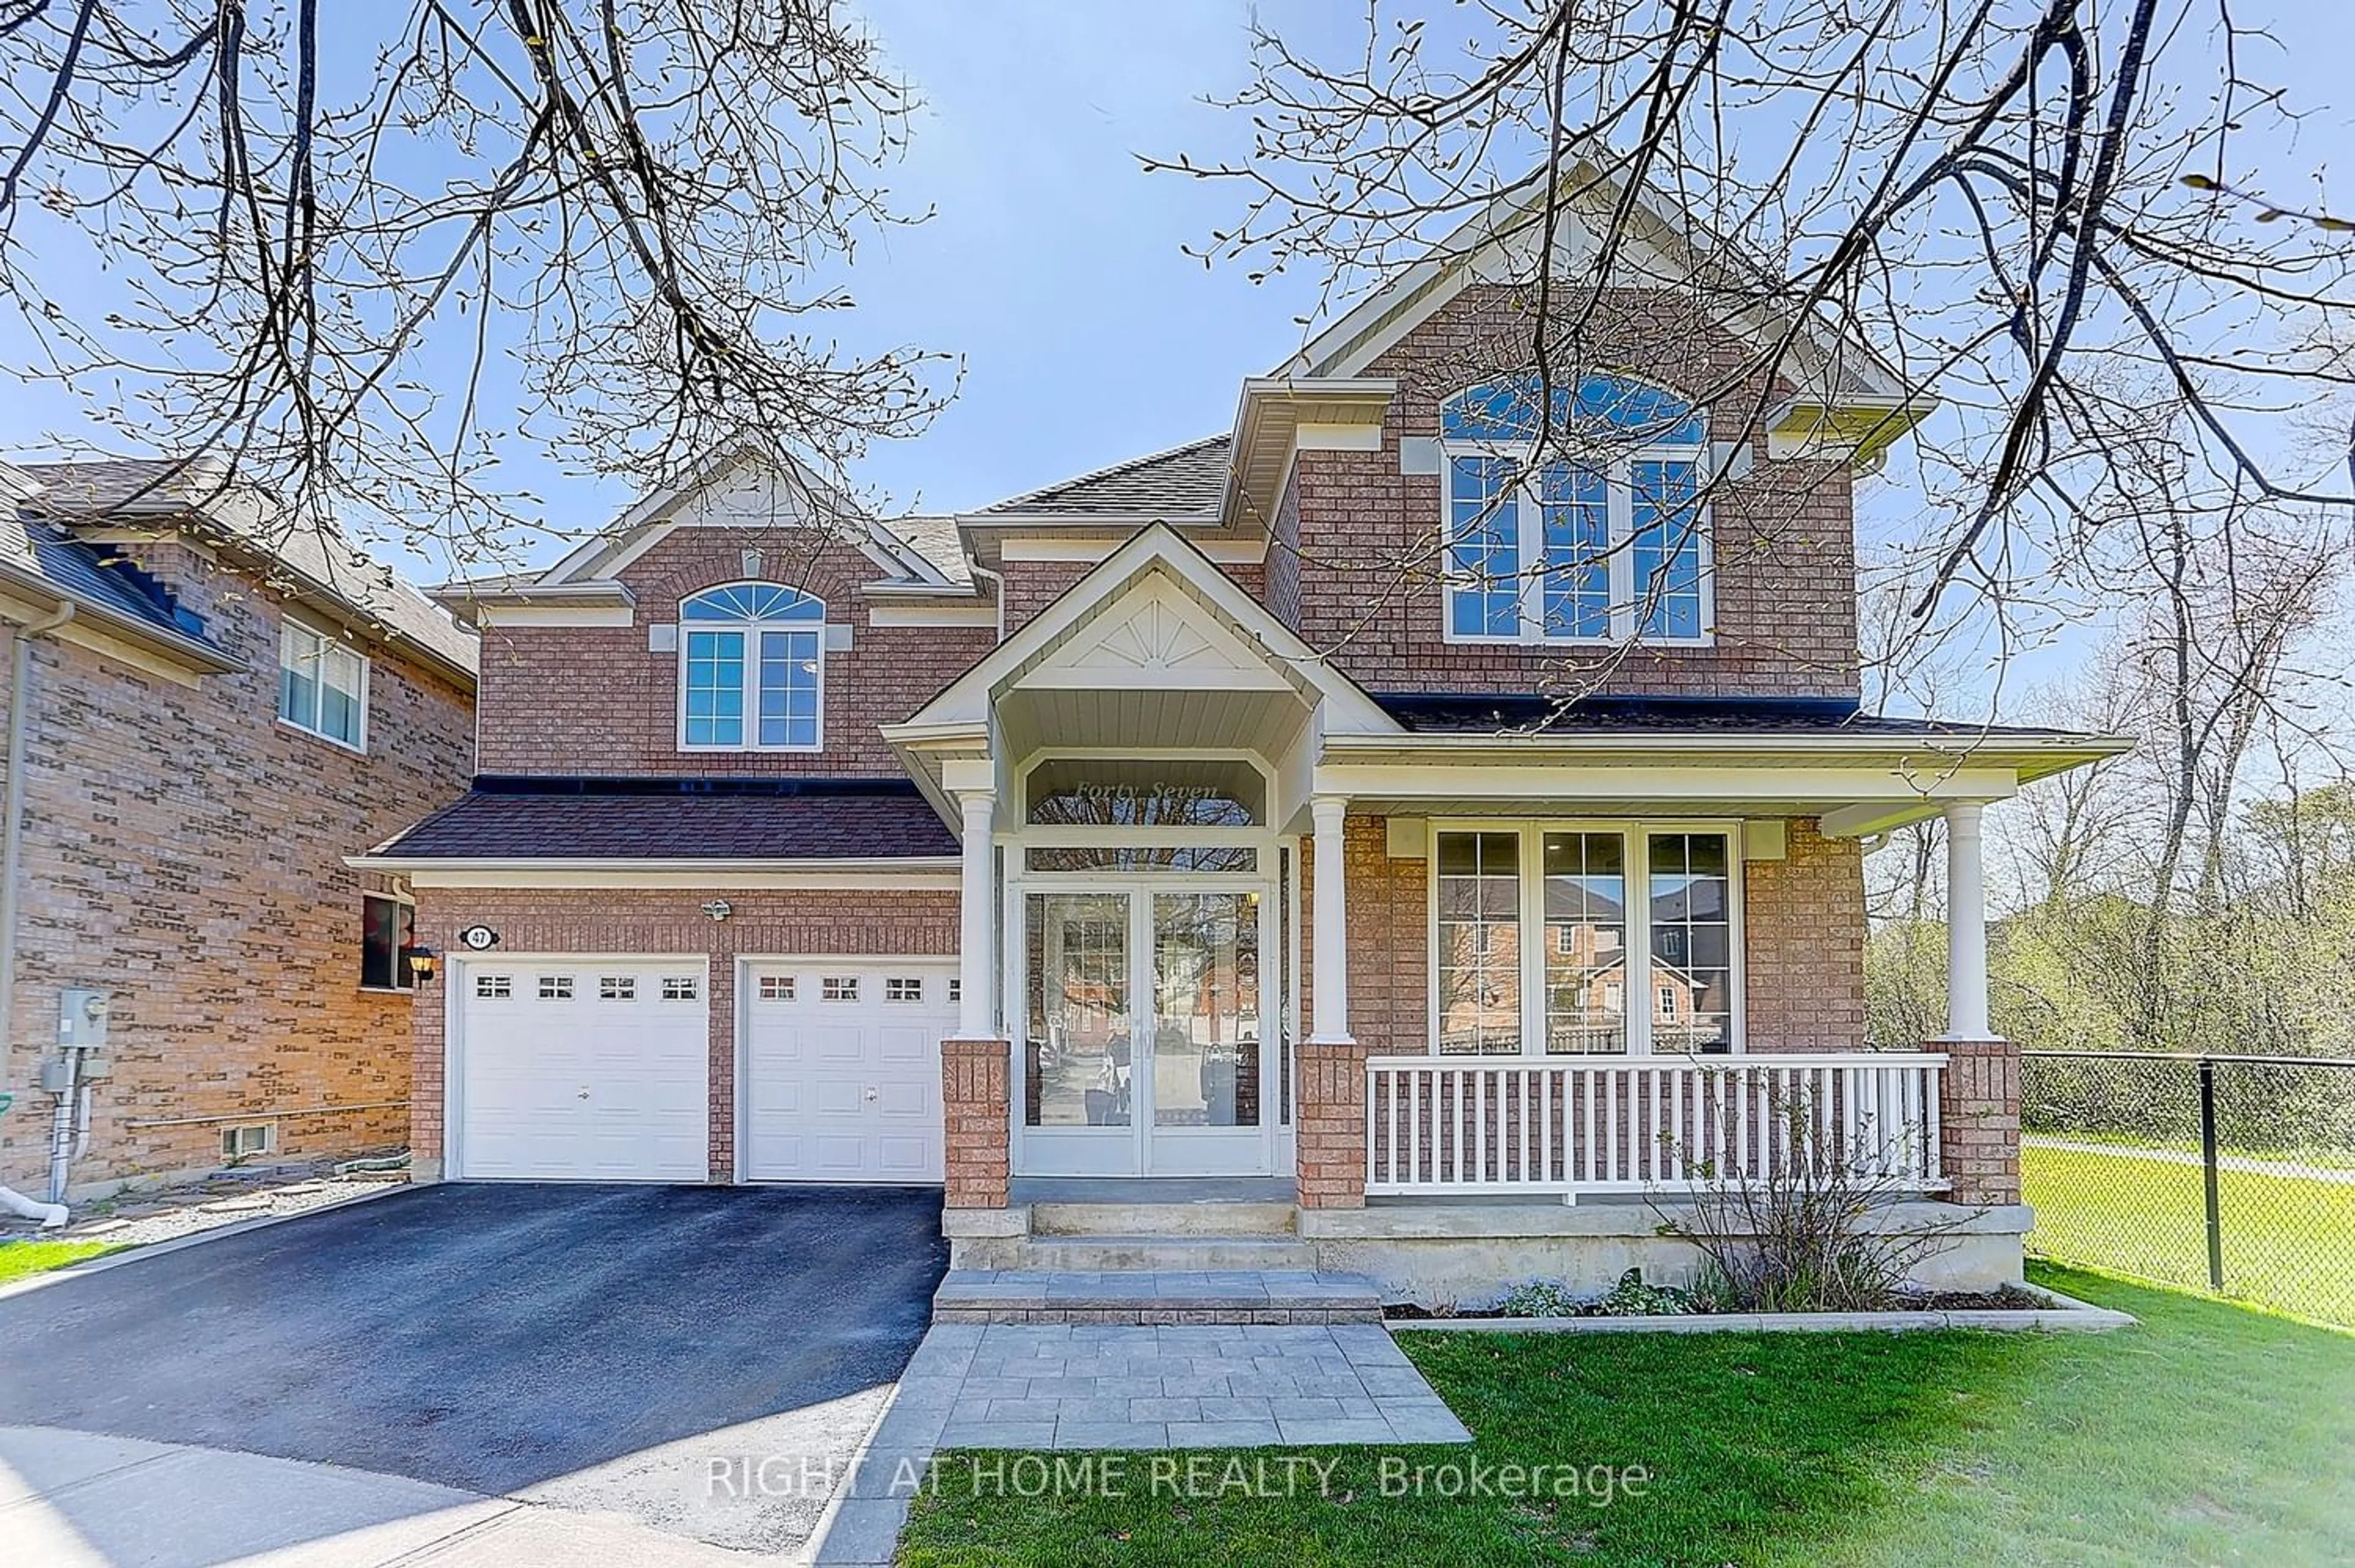 Home with brick exterior material for 47 Wiltshire Dr, Markham Ontario L6C 2N2